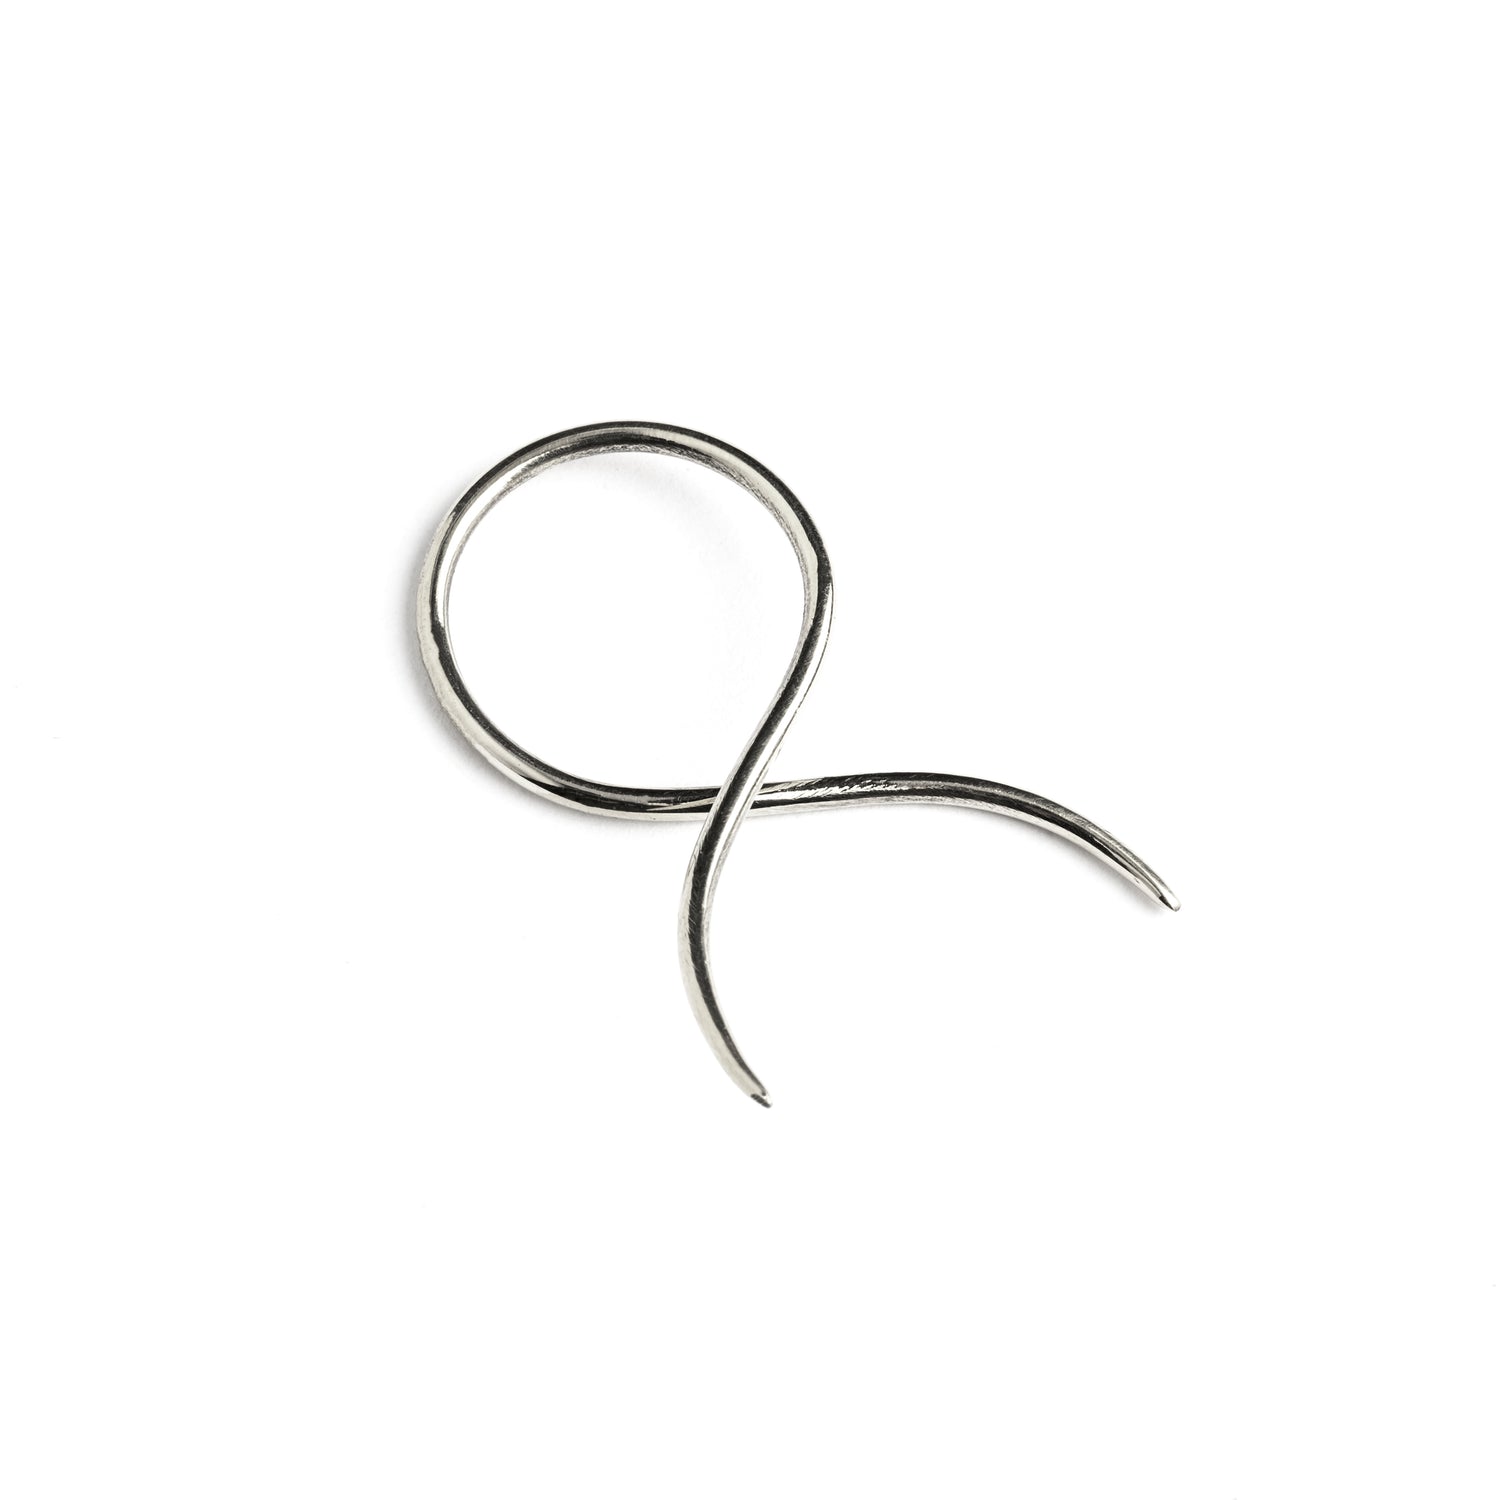 single silver wire twisted curved hook earring right side view